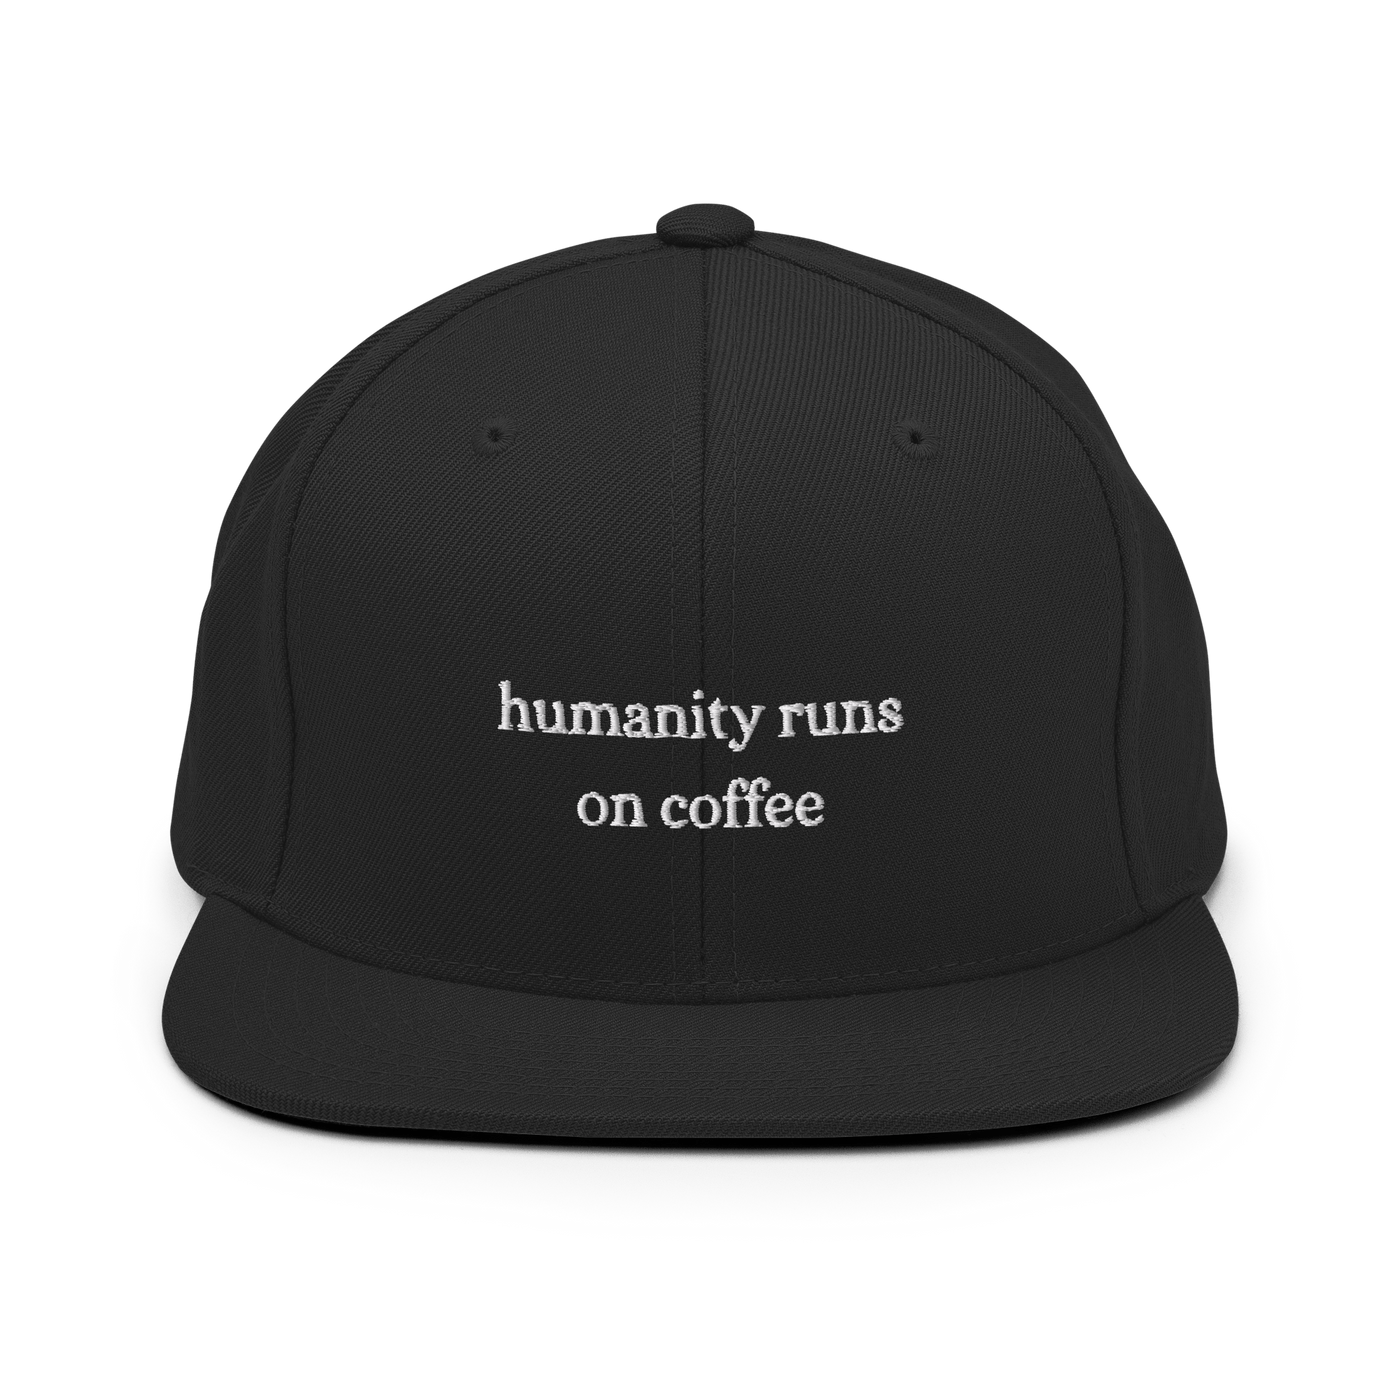 Humanity runs on coffee Snapback Hat - Black - - Just Another Cap Store